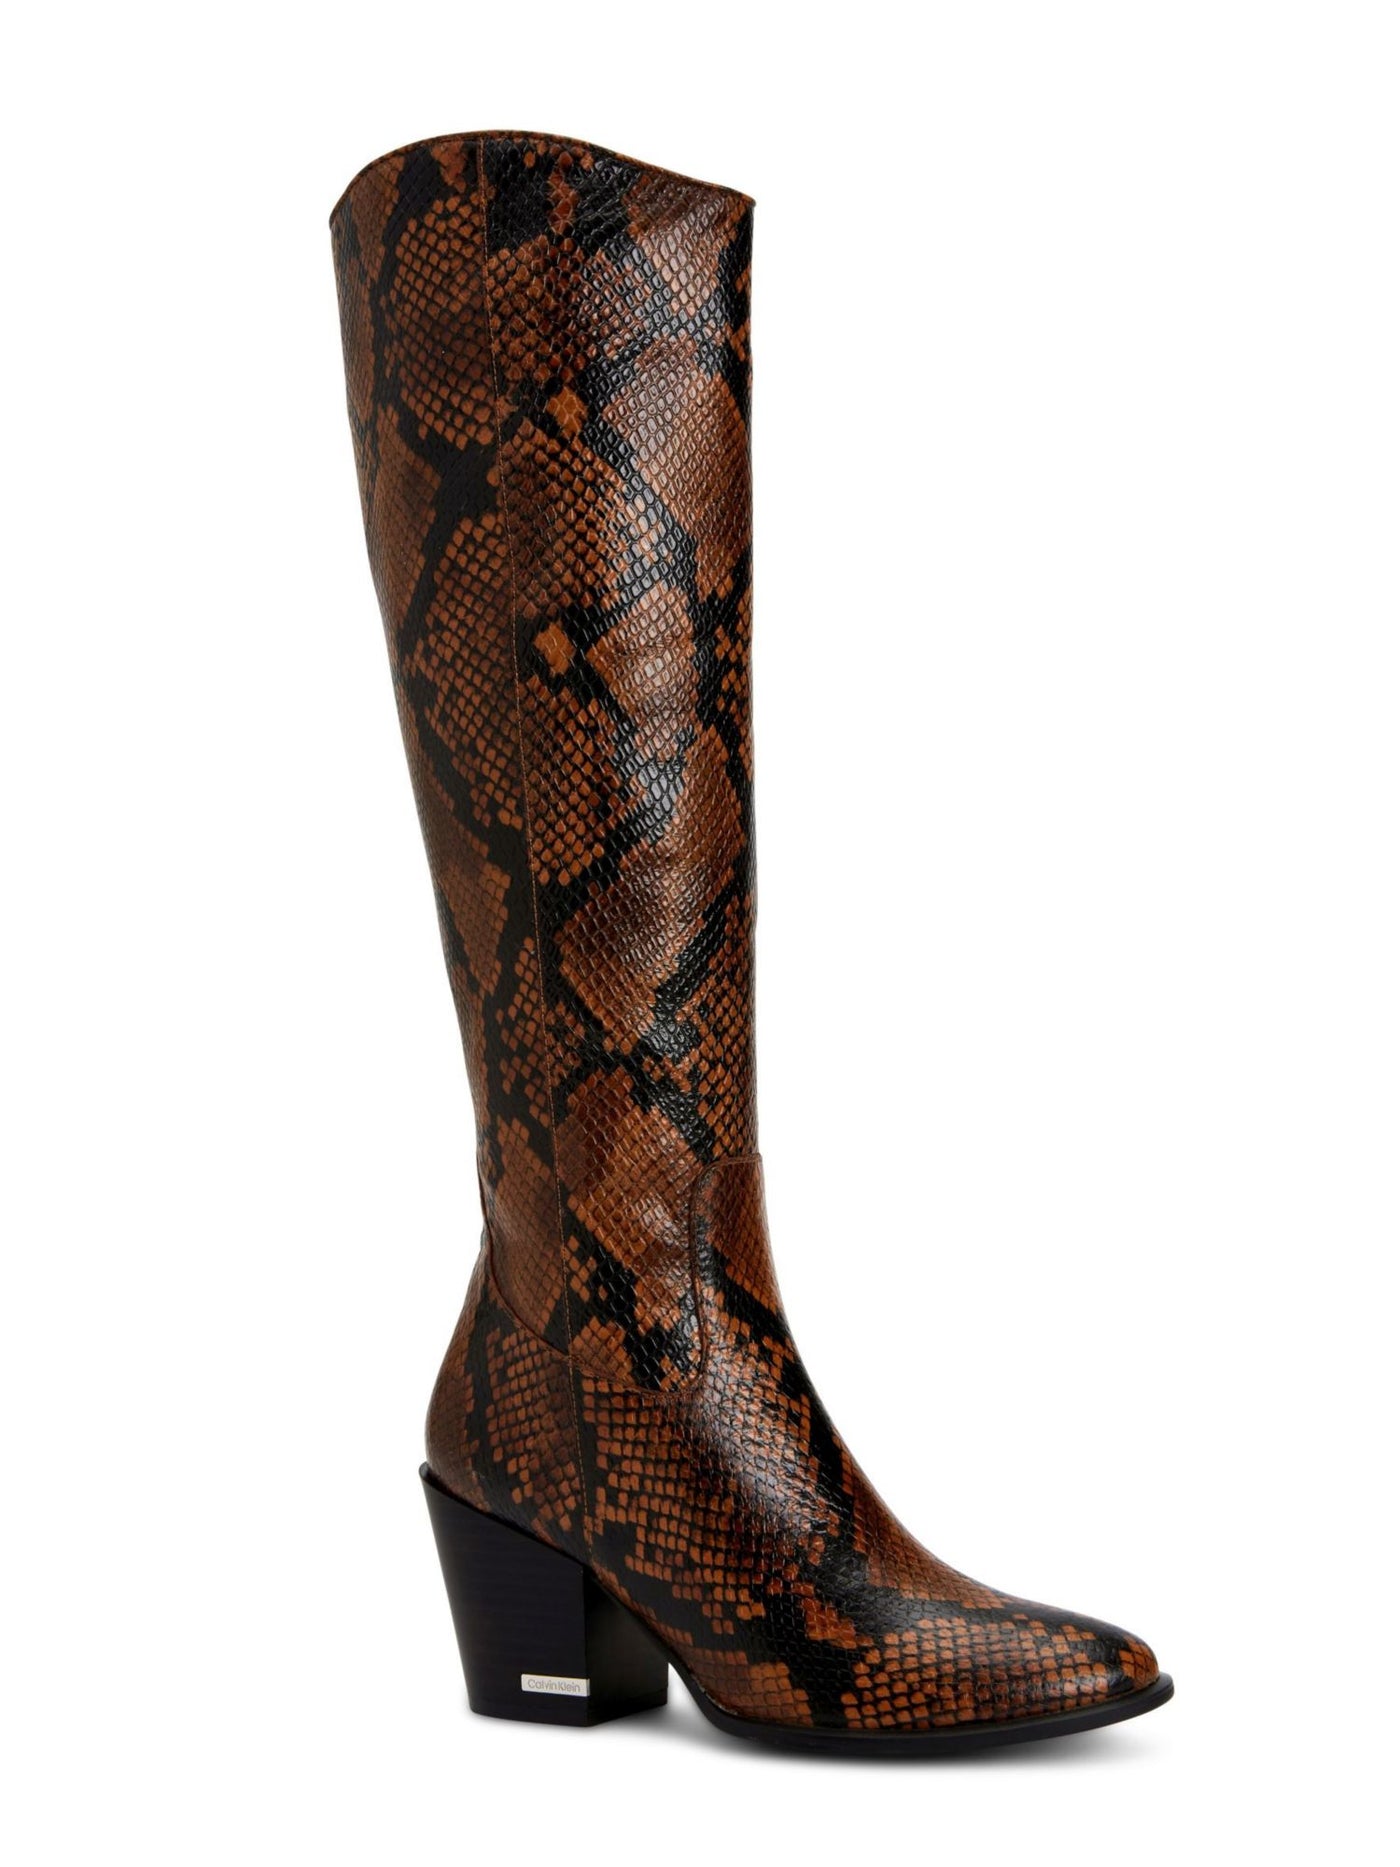 CALVIN KLEIN Womens Brown Animal Print Almond Toe Stacked Heel Zip-Up Leather Heeled Boots 5.5